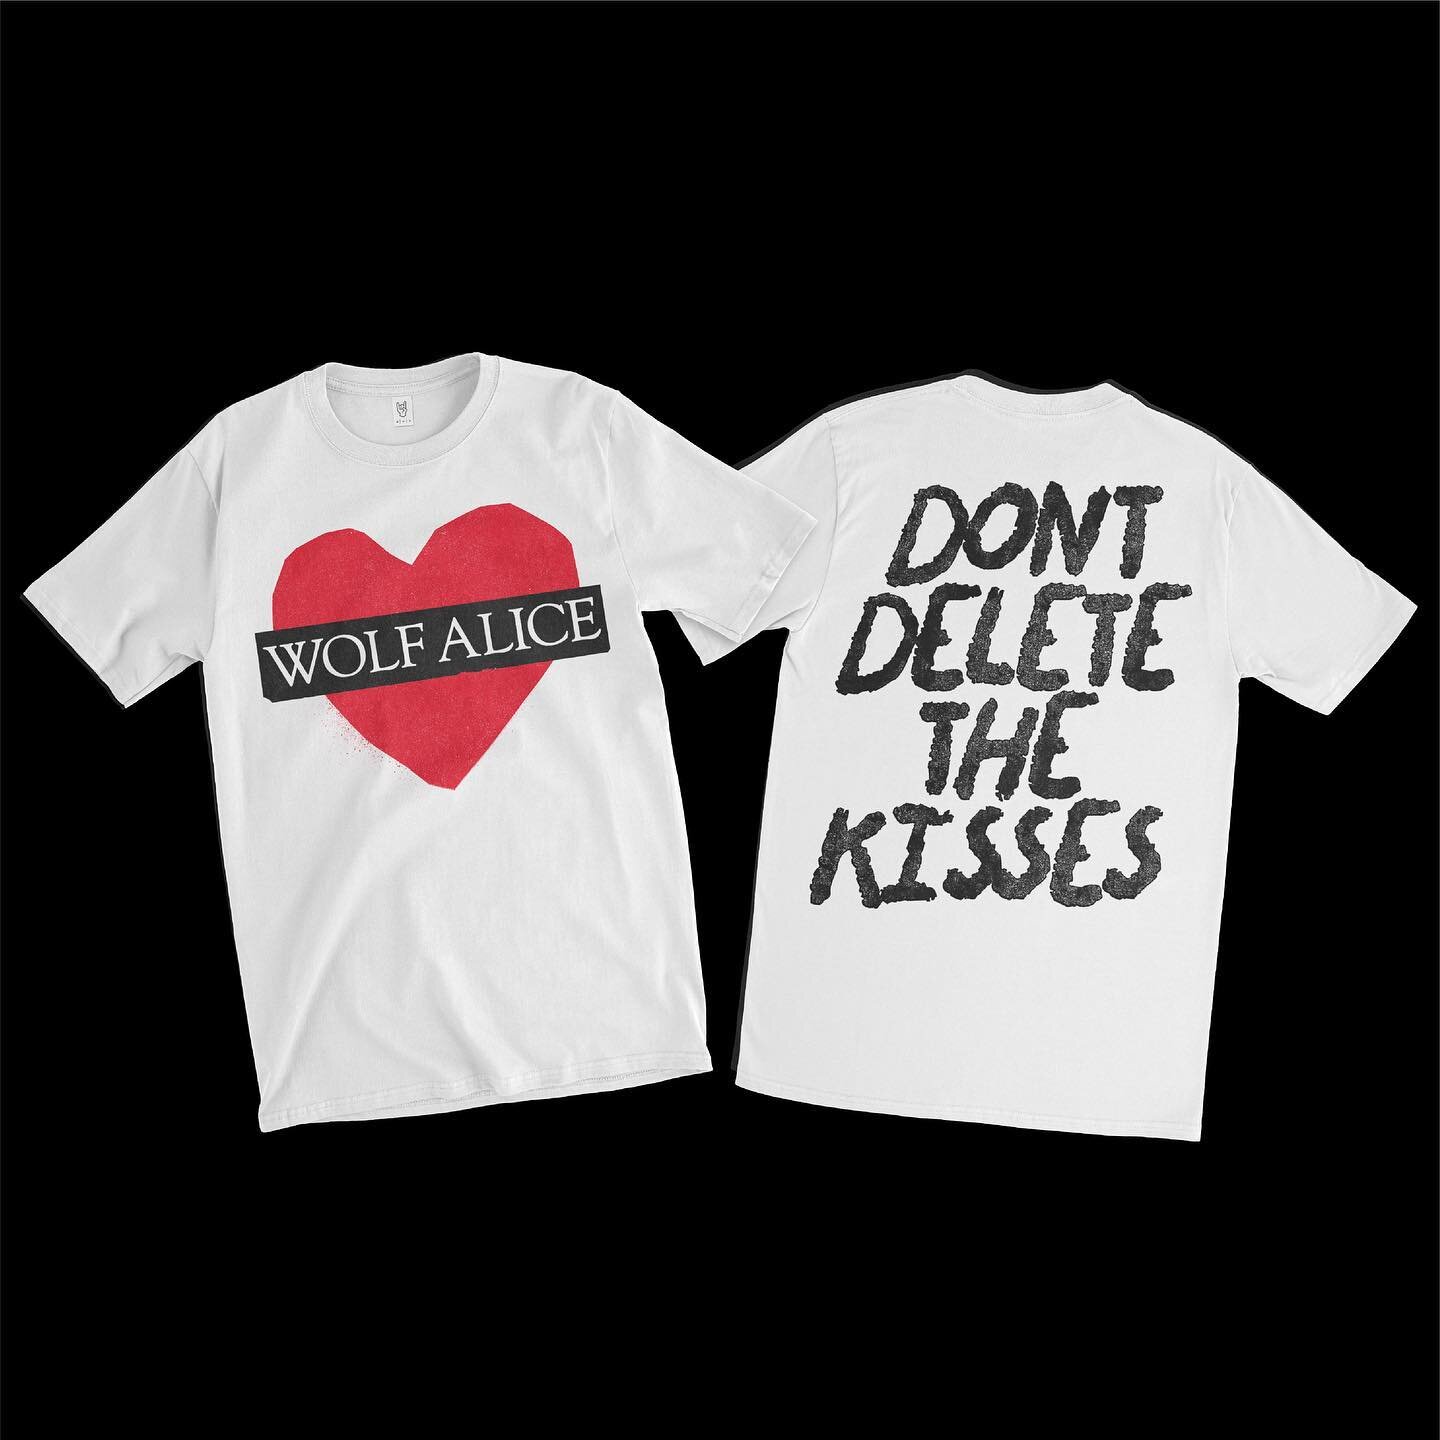 Valentine&rsquo;s Edition Wolf Alice Merch ❤️

I made these for the #FaceTheMusic Art Challenge for @posterspy 

#WolfAlice #valentines #Posterspy #posterspyartchallenge #merch #ValentinesDay